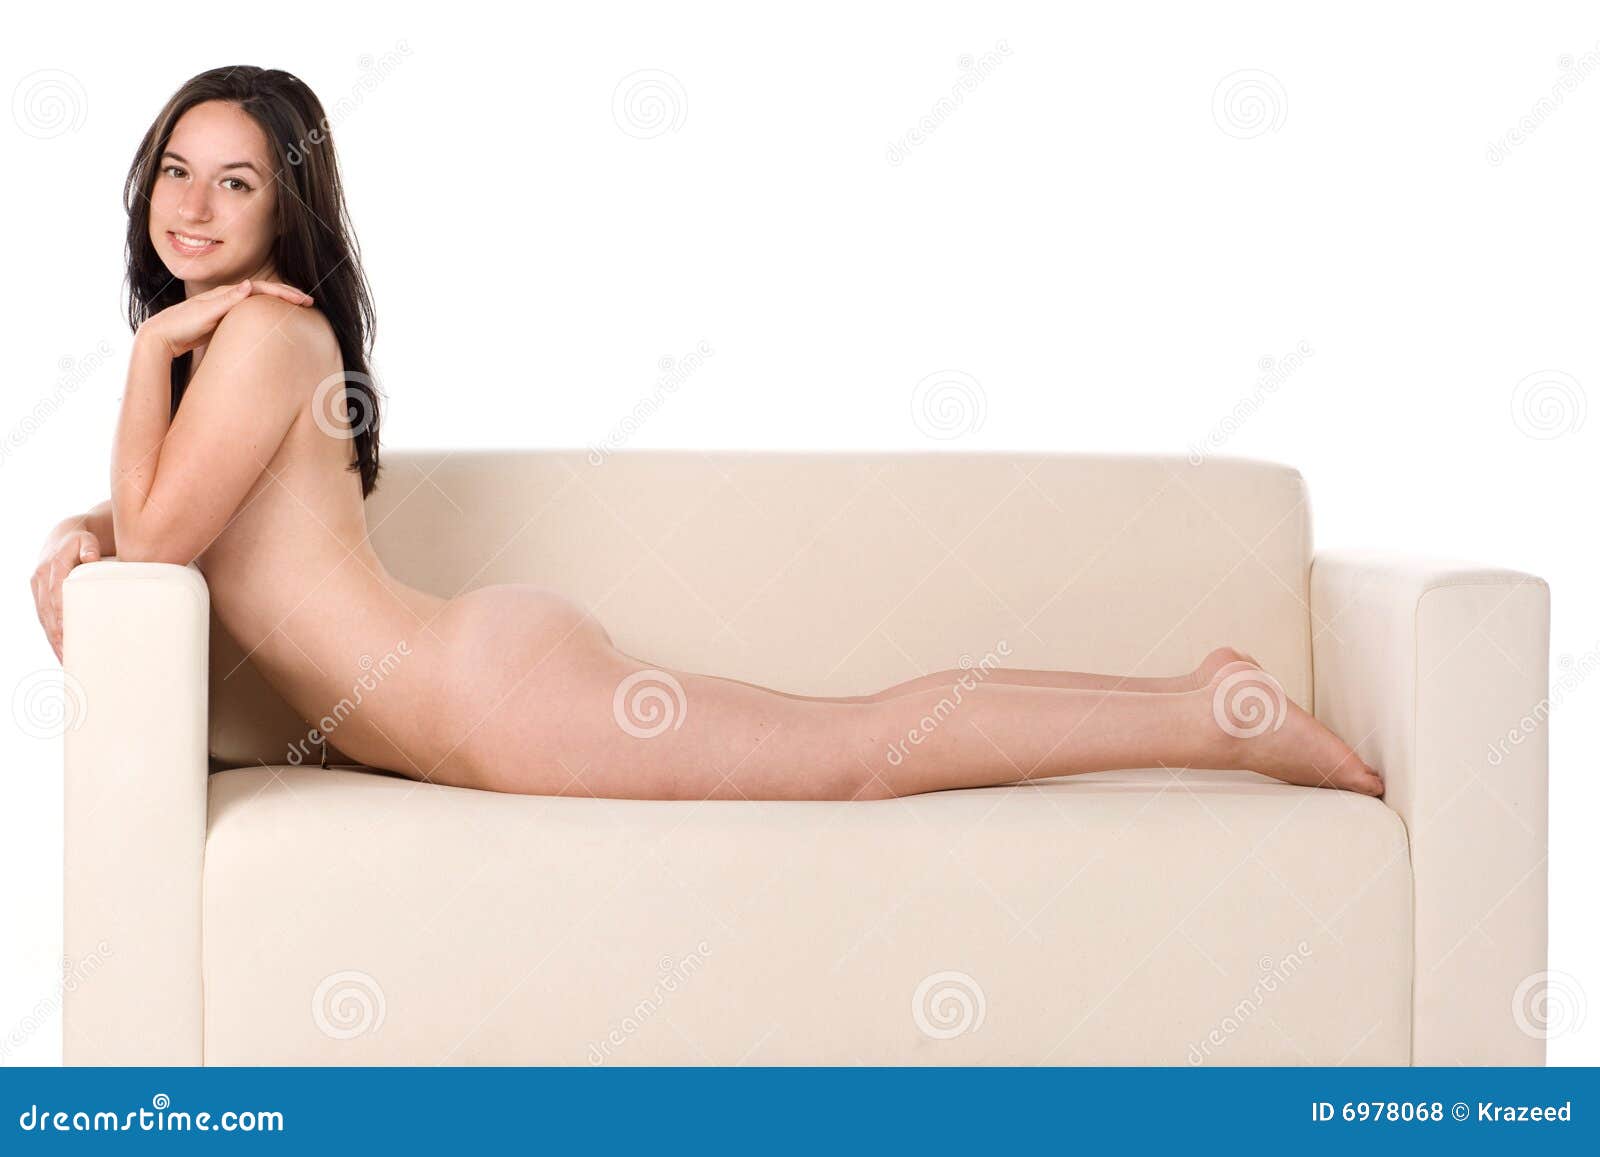 Nudity On The Couch